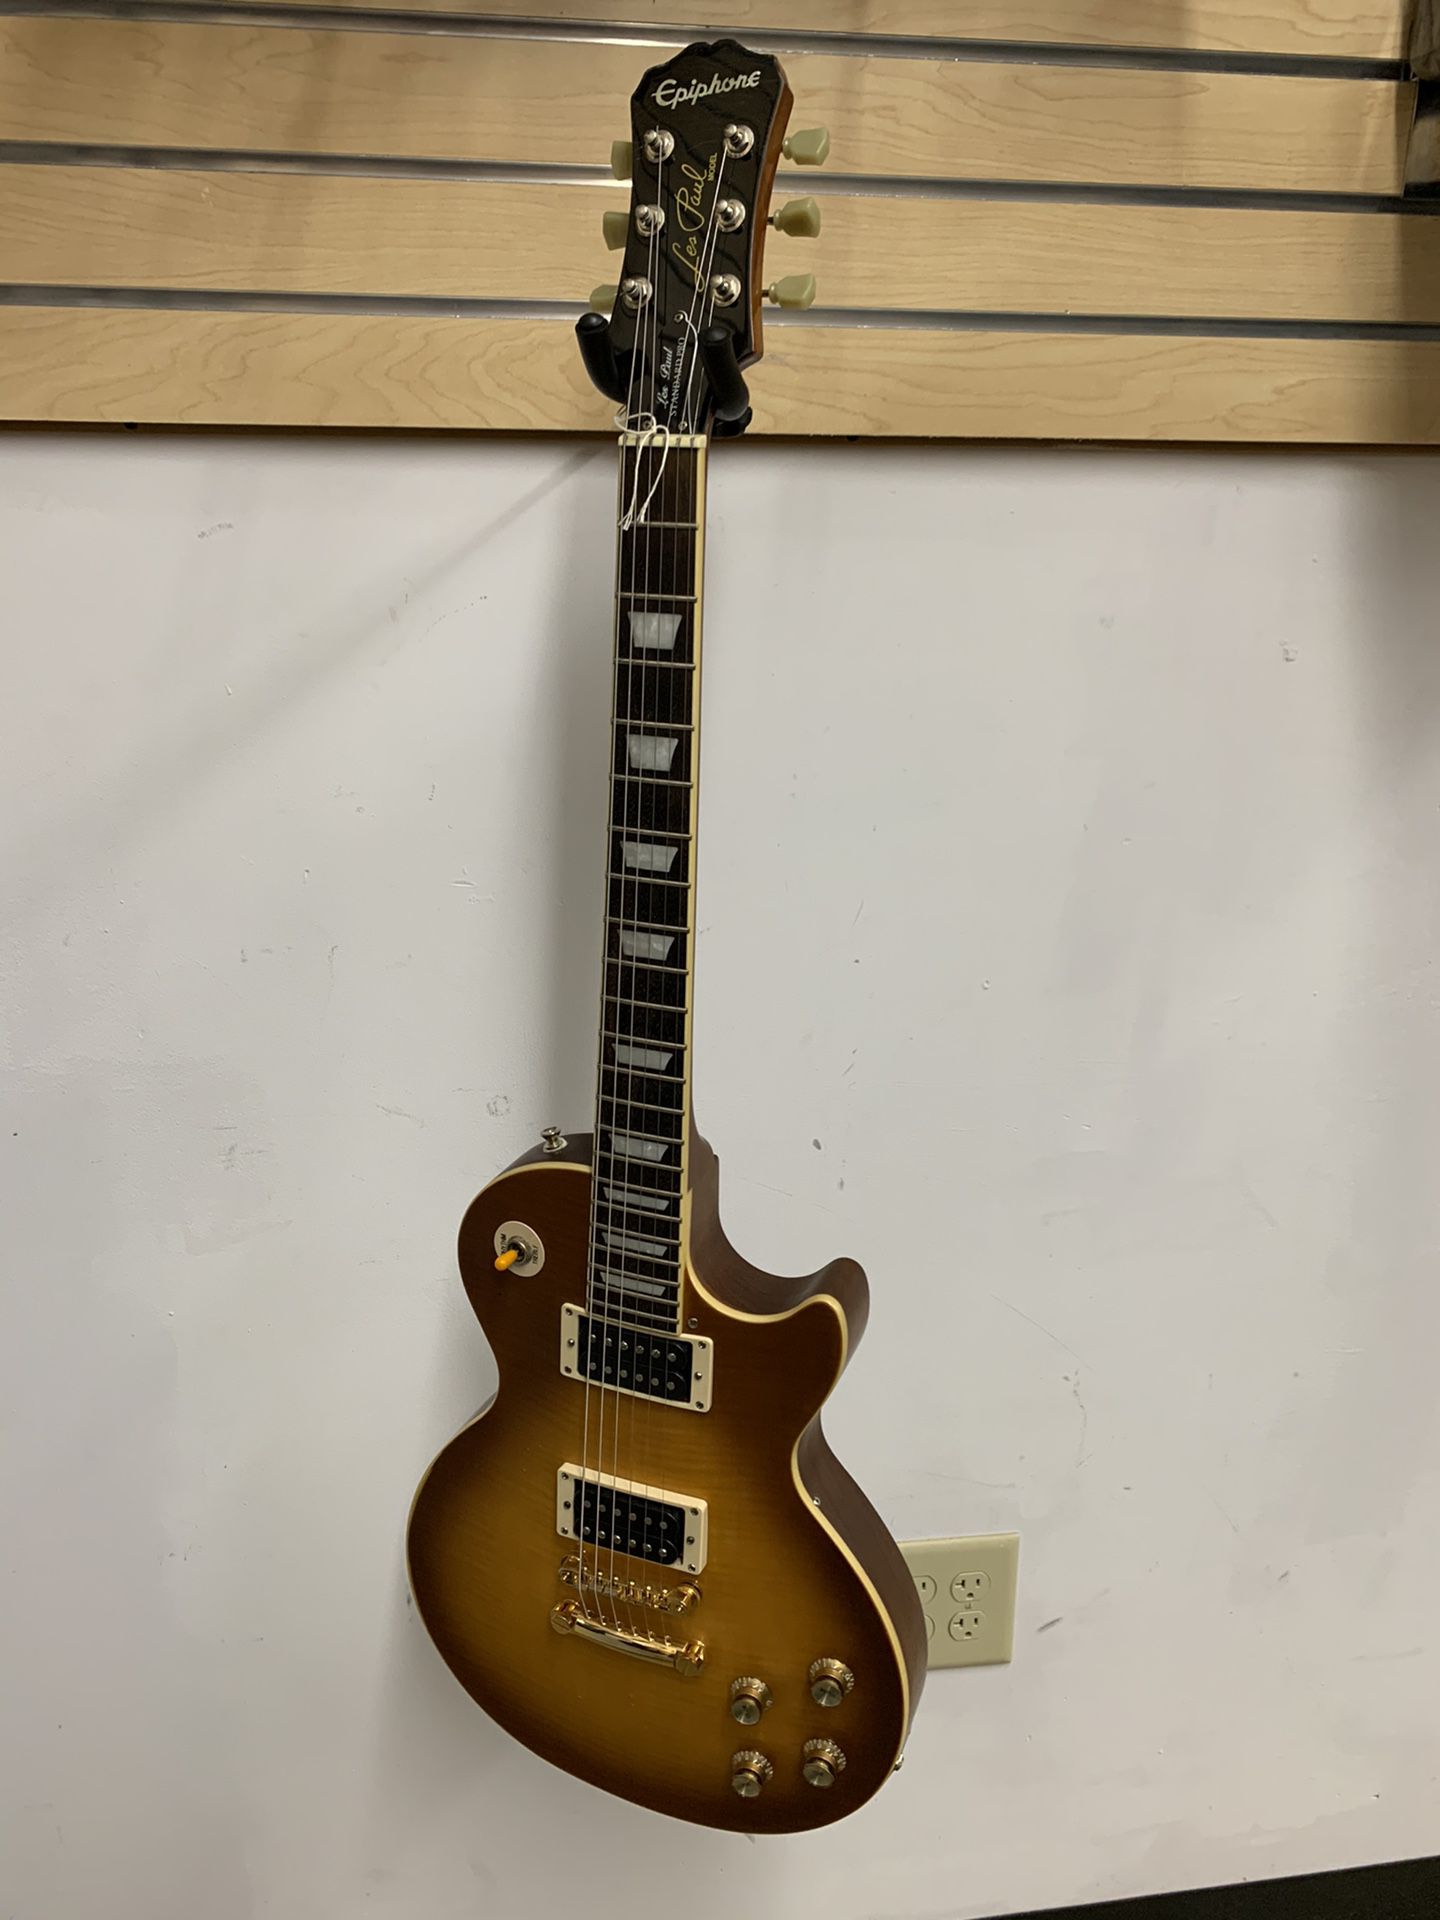 Epiphone Les Paul standard pro electric guitar with case